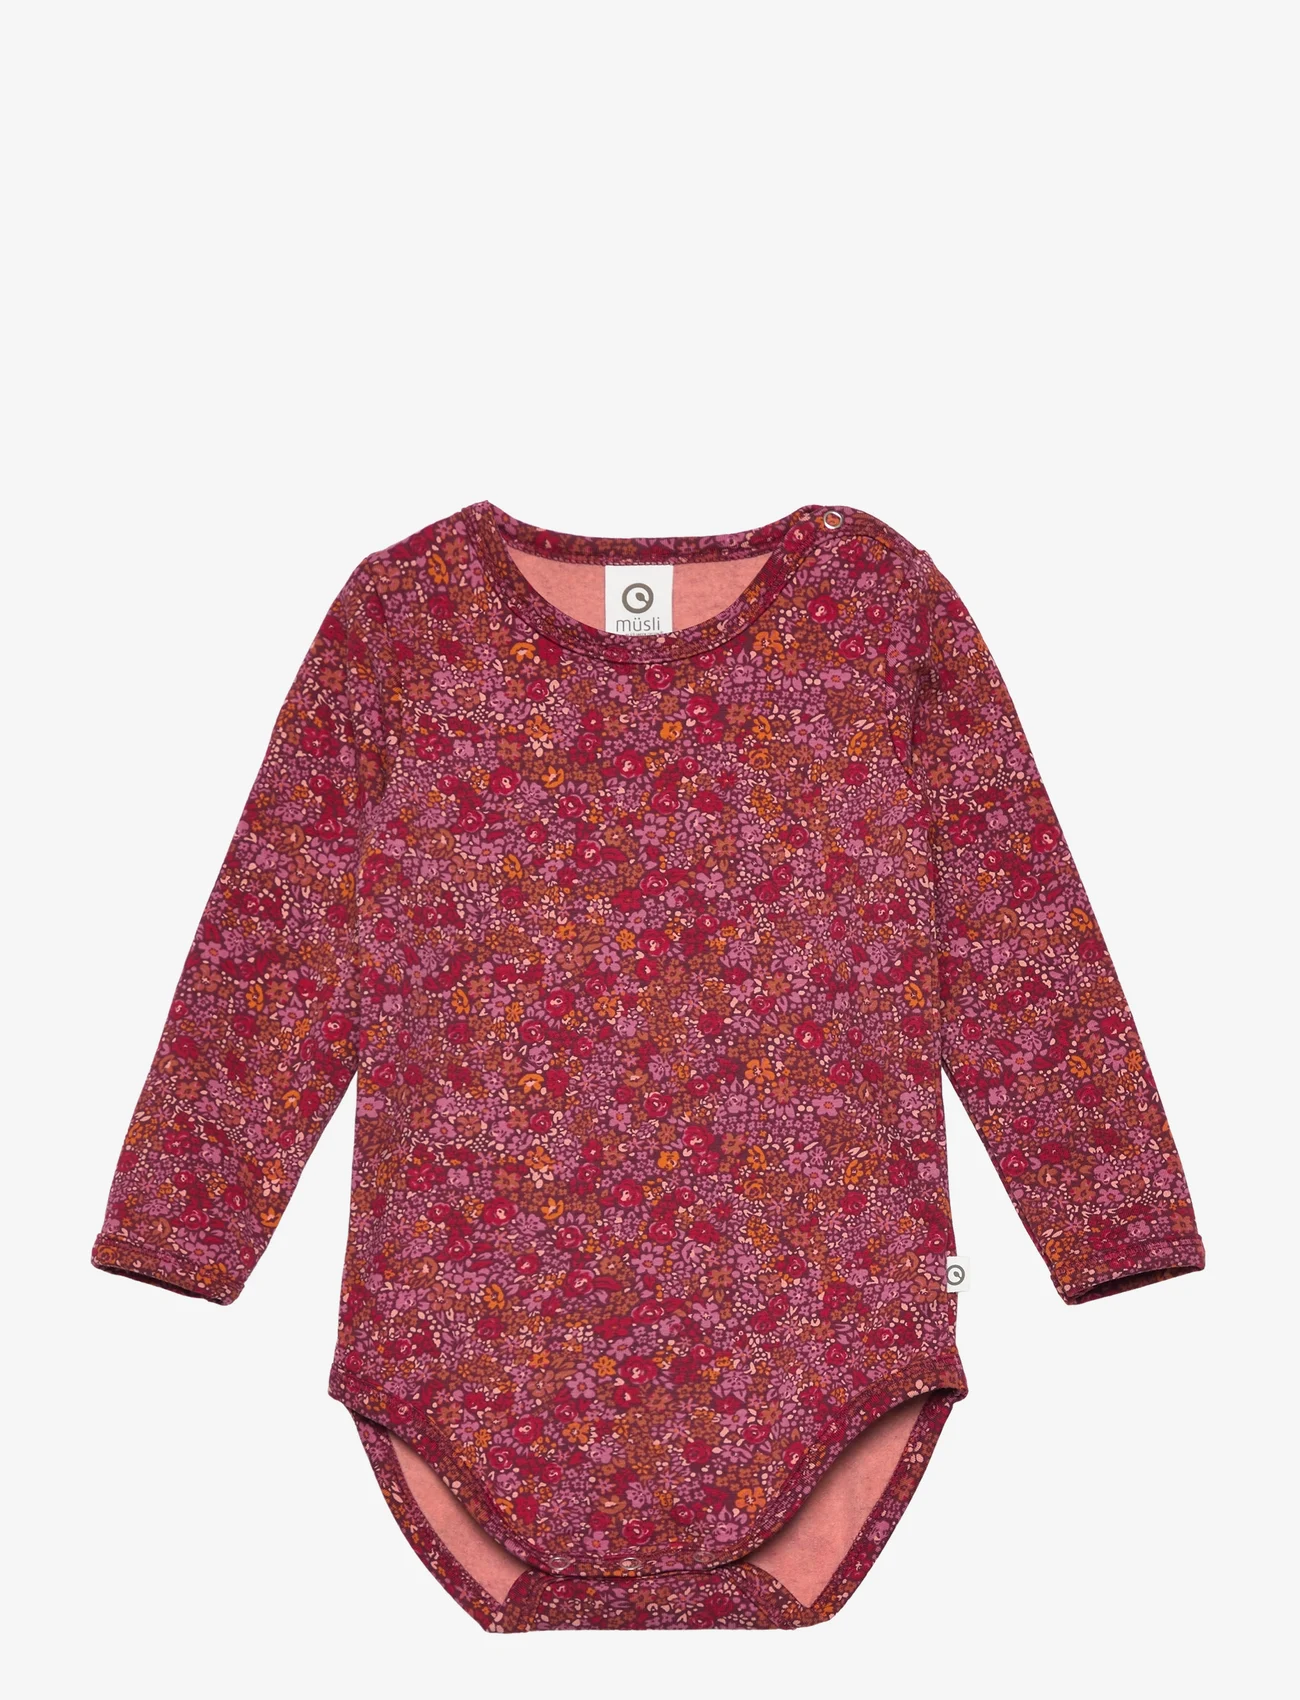 Müsli by Green Cotton - Petit blossom l/s body - madalaimad hinnad - fig/boysenberry/berry red - 0